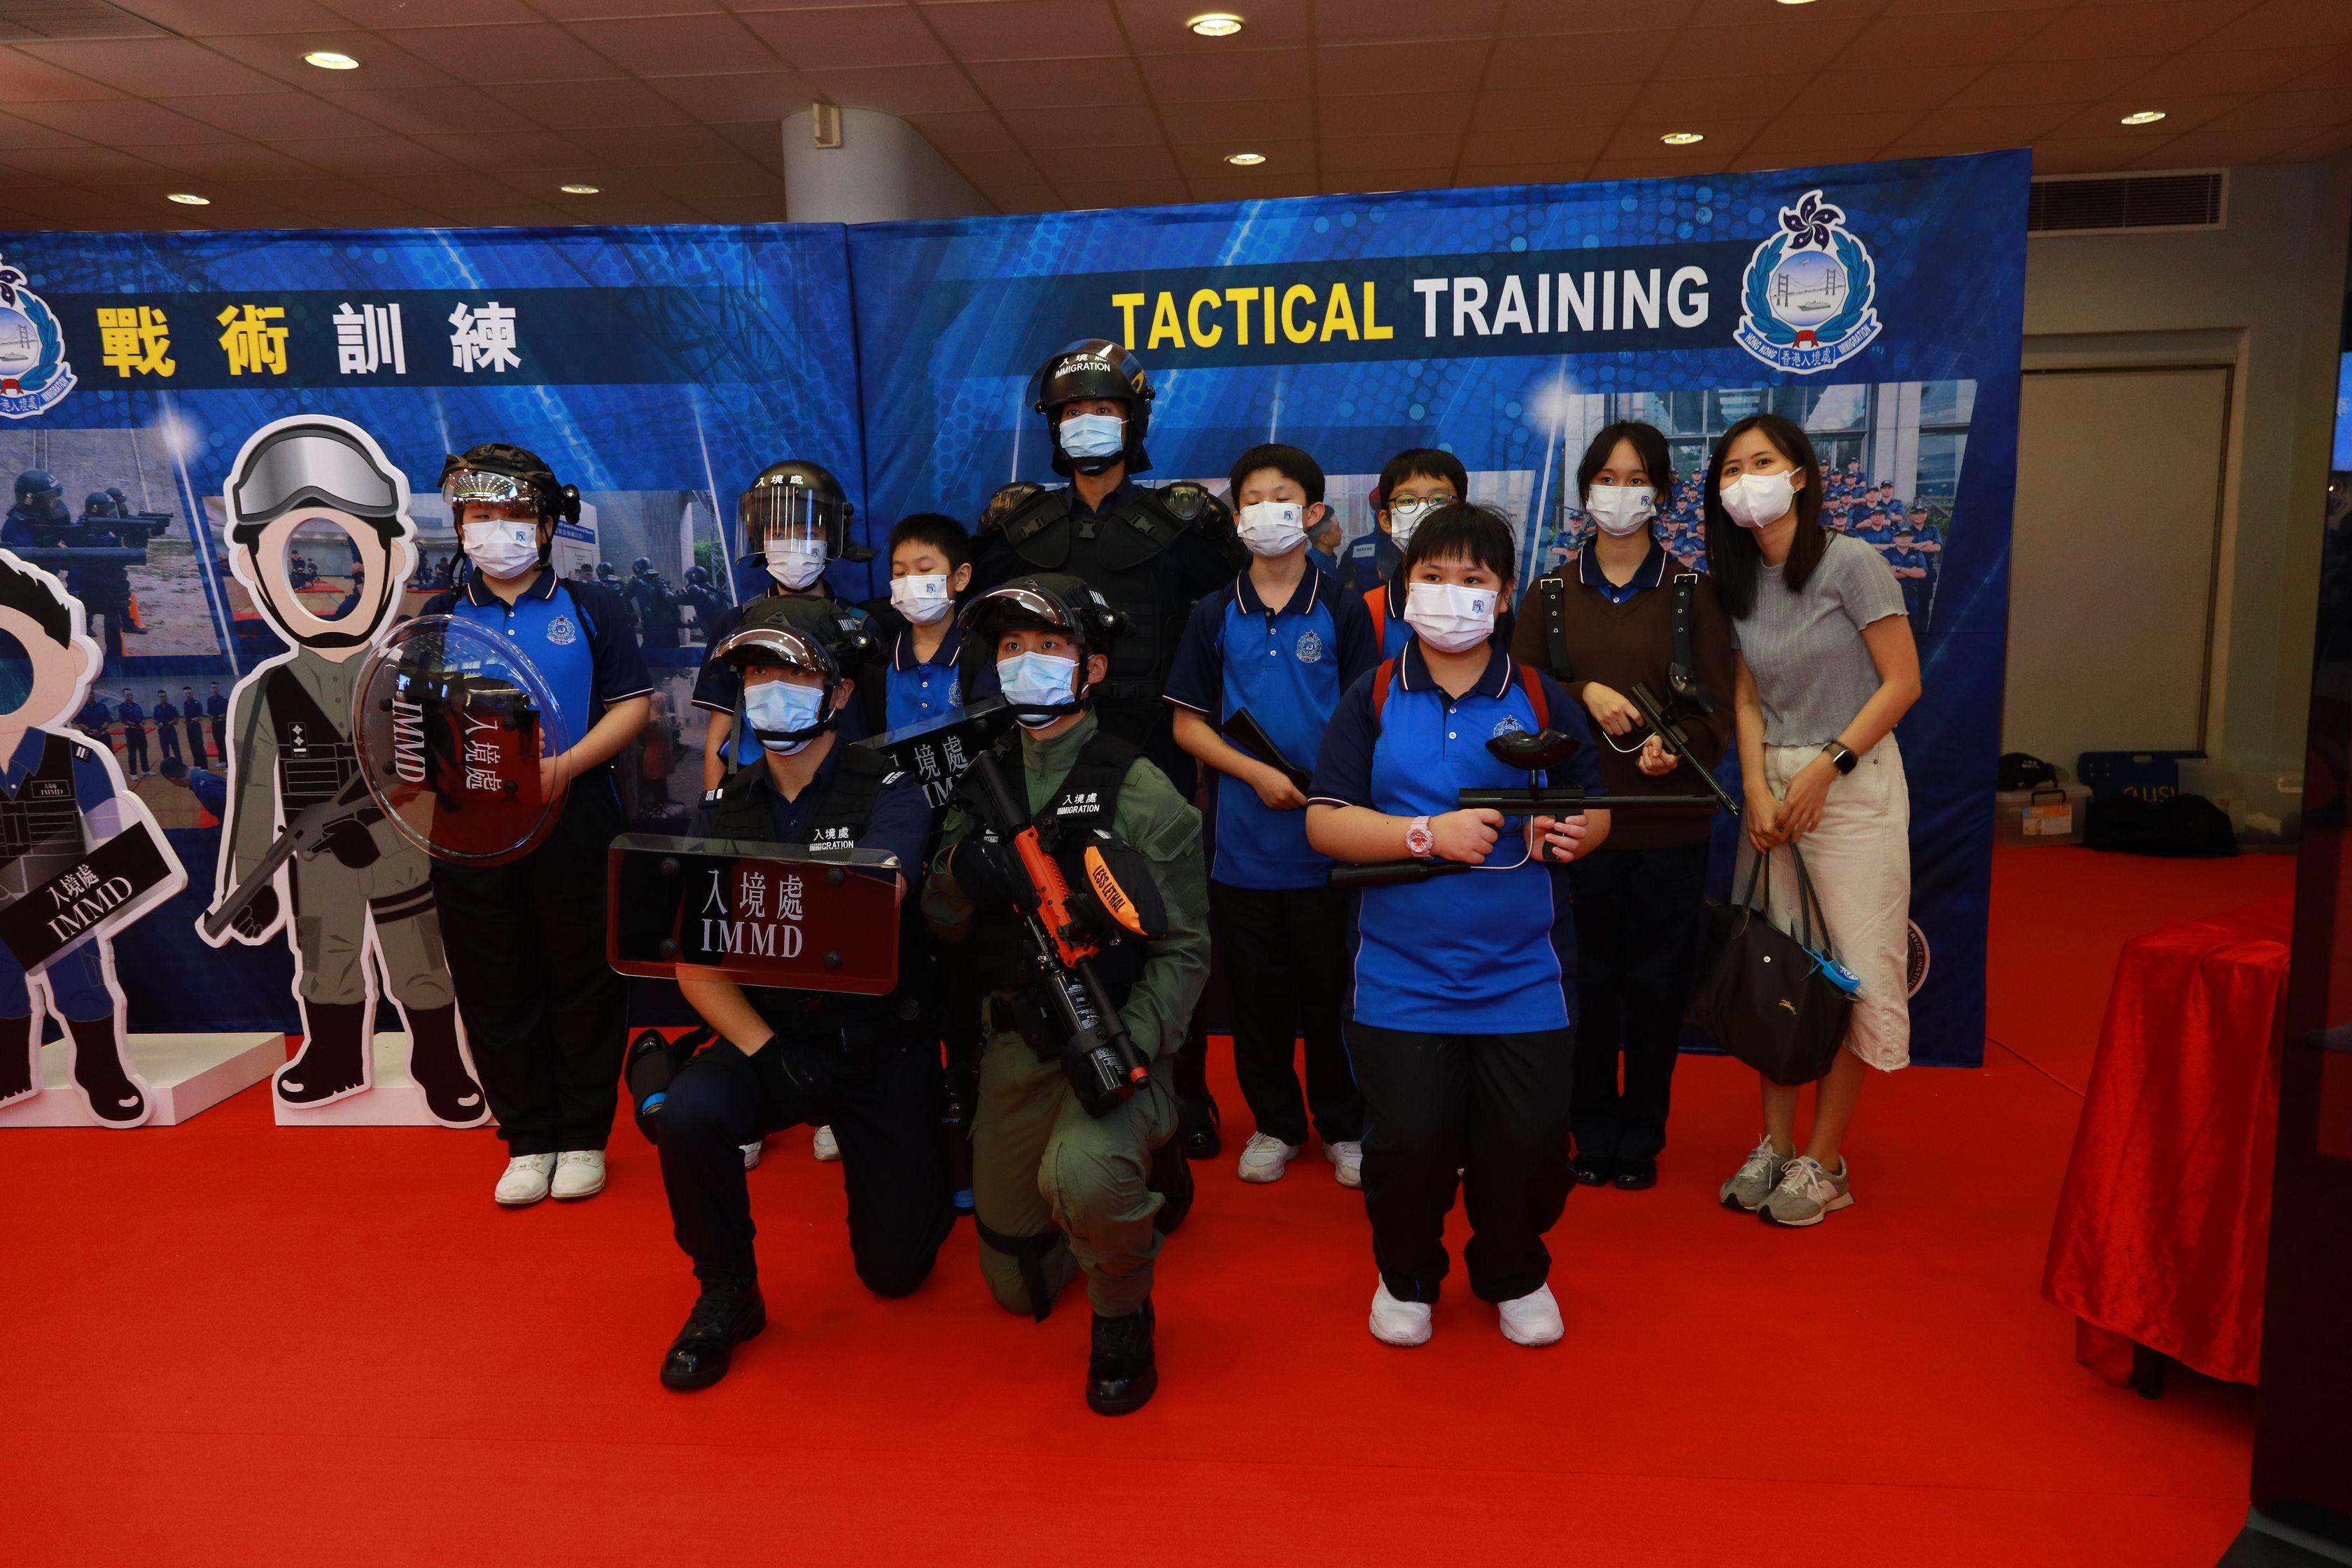 The Immigration Service Institute of Training and Development held an Open Day today (October 29). Photo shows Service members showing the tactical equipment of the Immigration Department to members of the public.